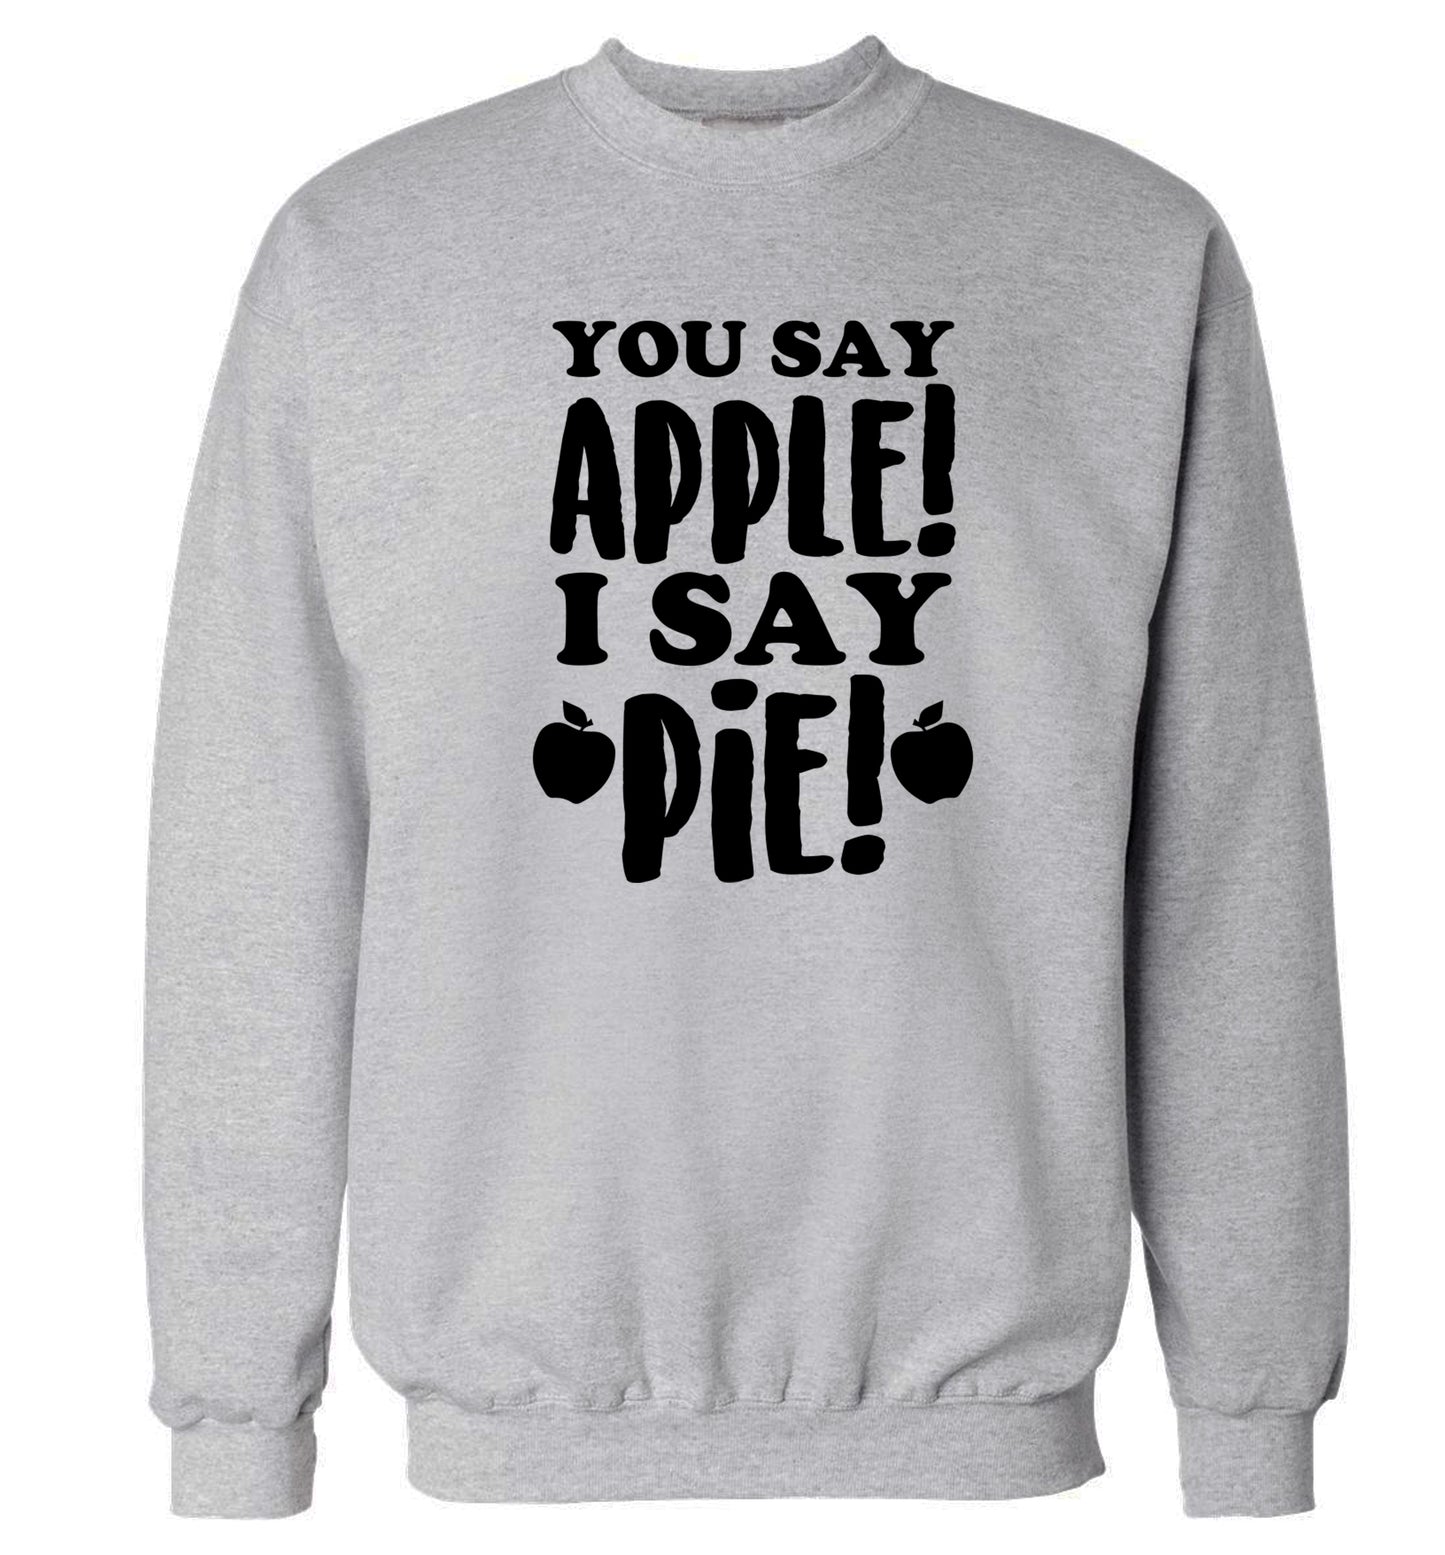 You say apple I say pie! Adult's unisex grey Sweater 2XL